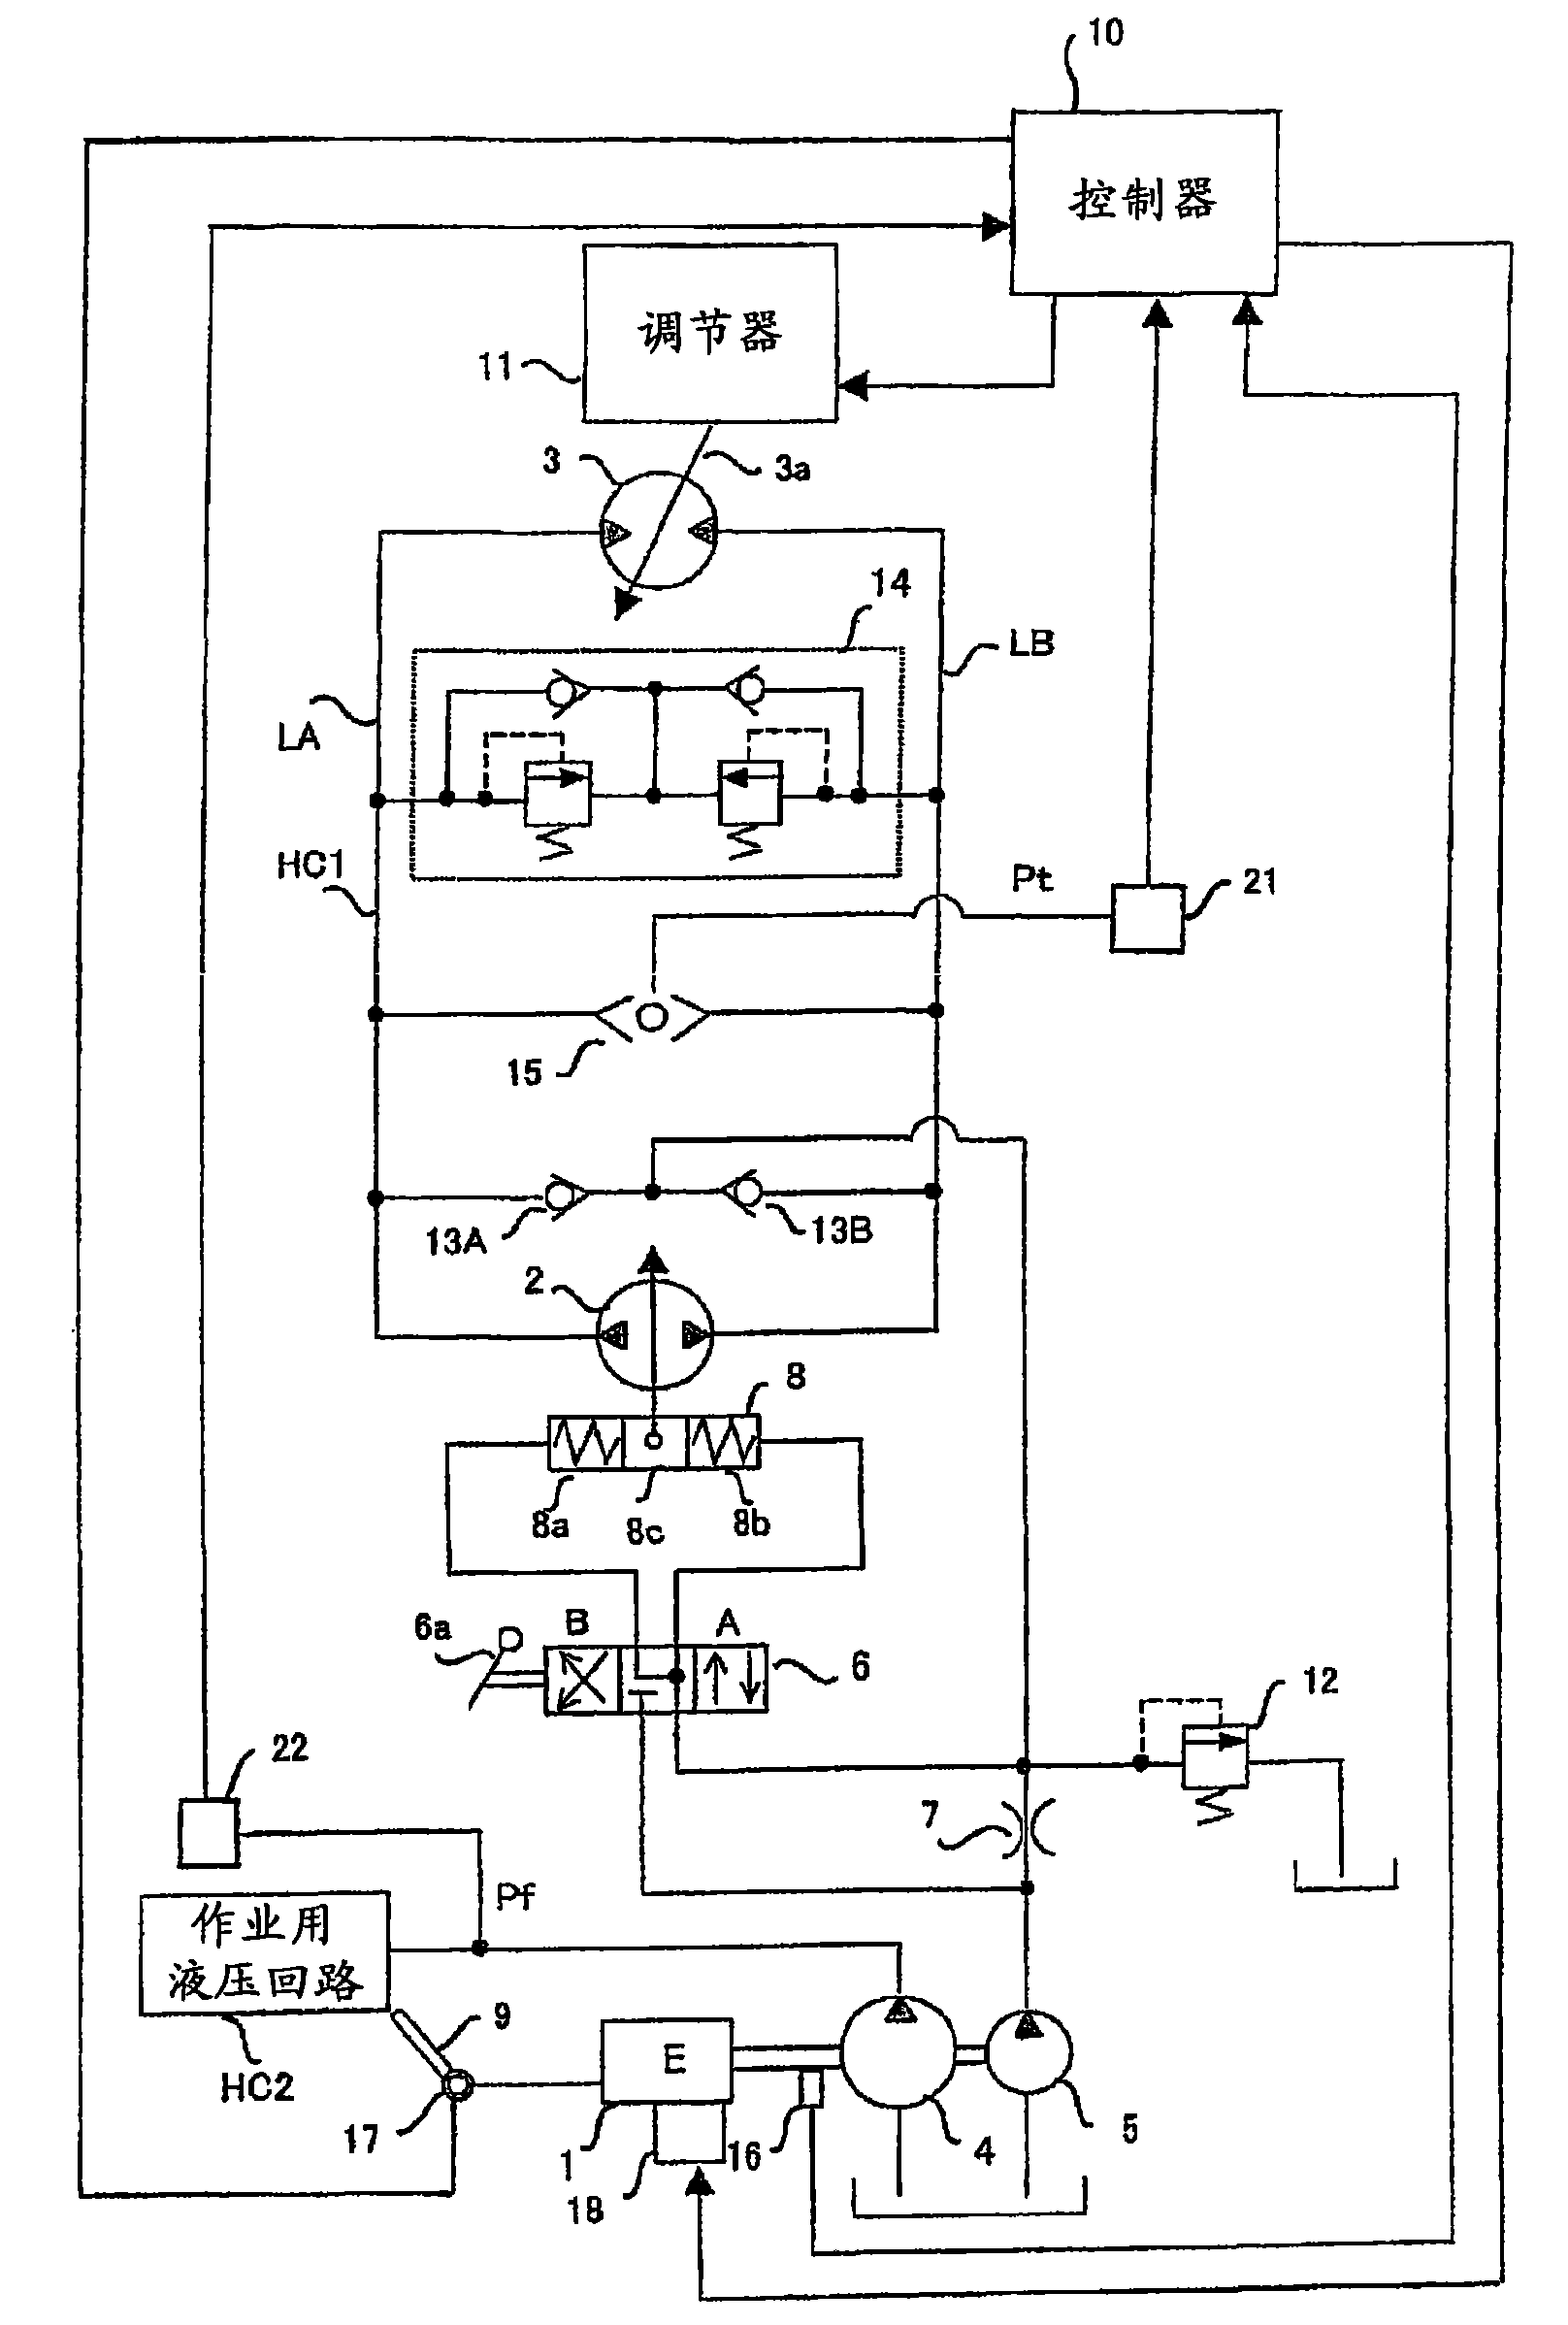 Control device for working vehicle